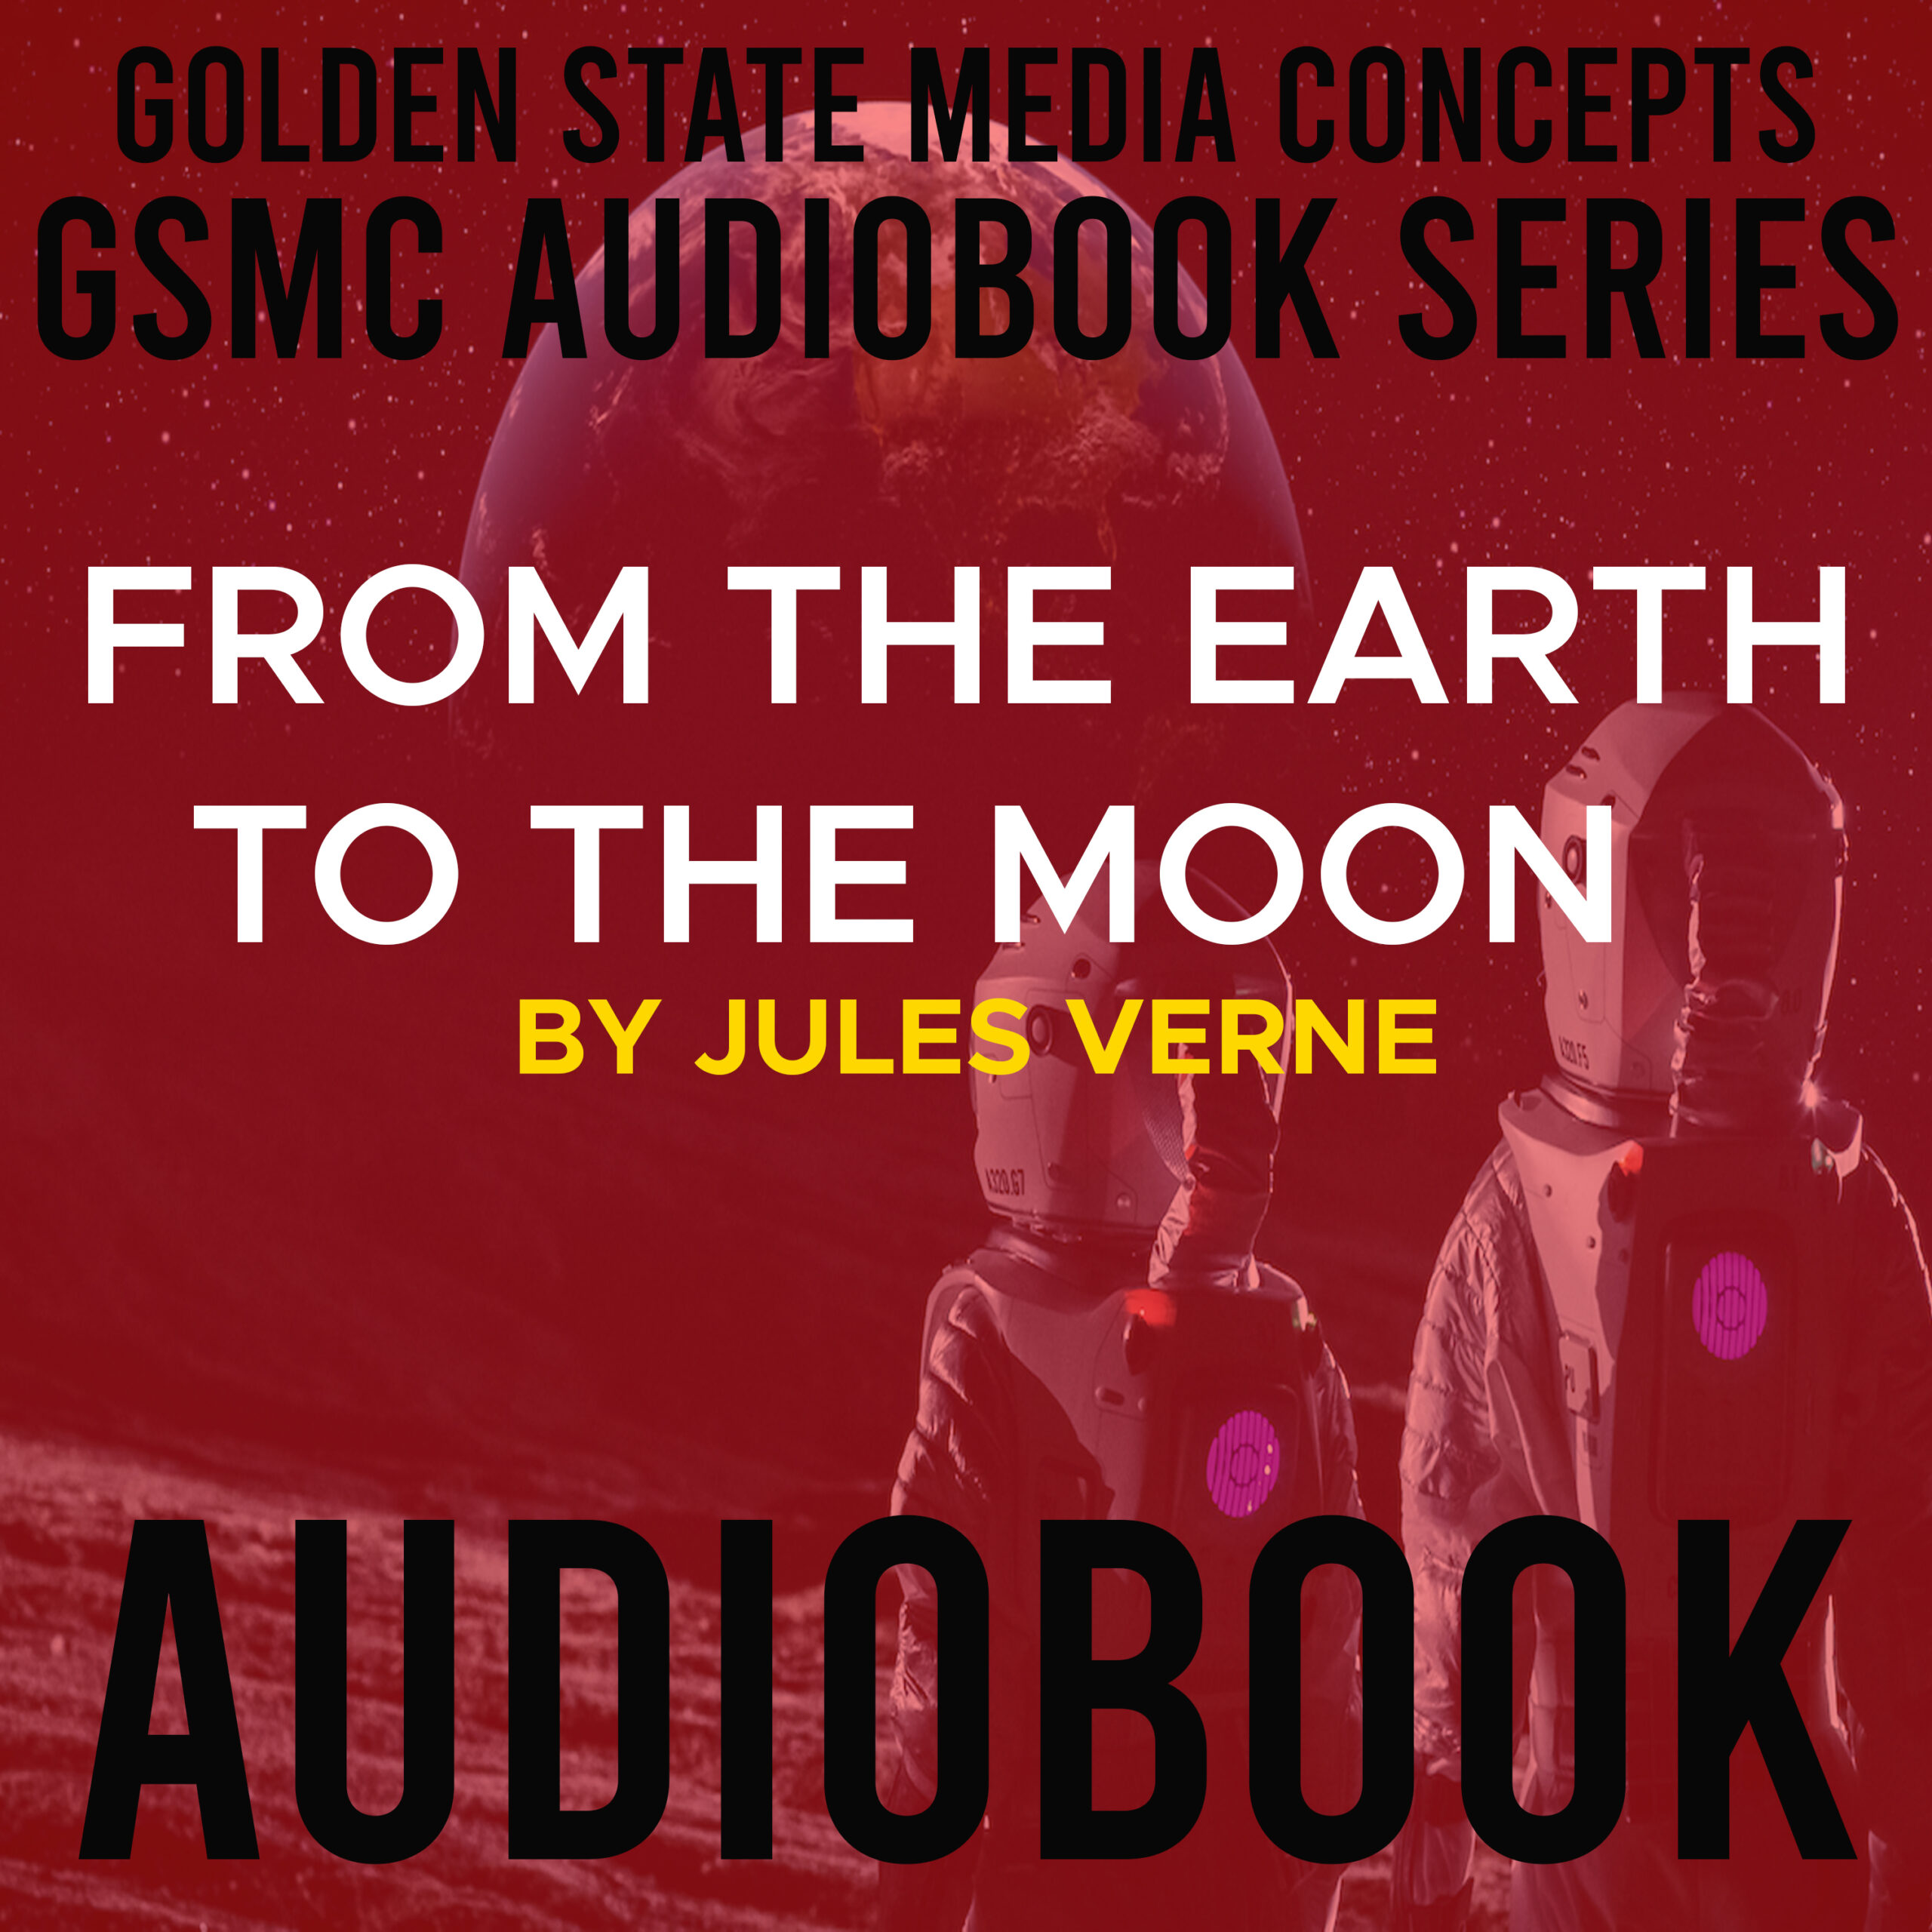 GSMC Audiobook Series: From the Earth to the Moon by Jules Verne